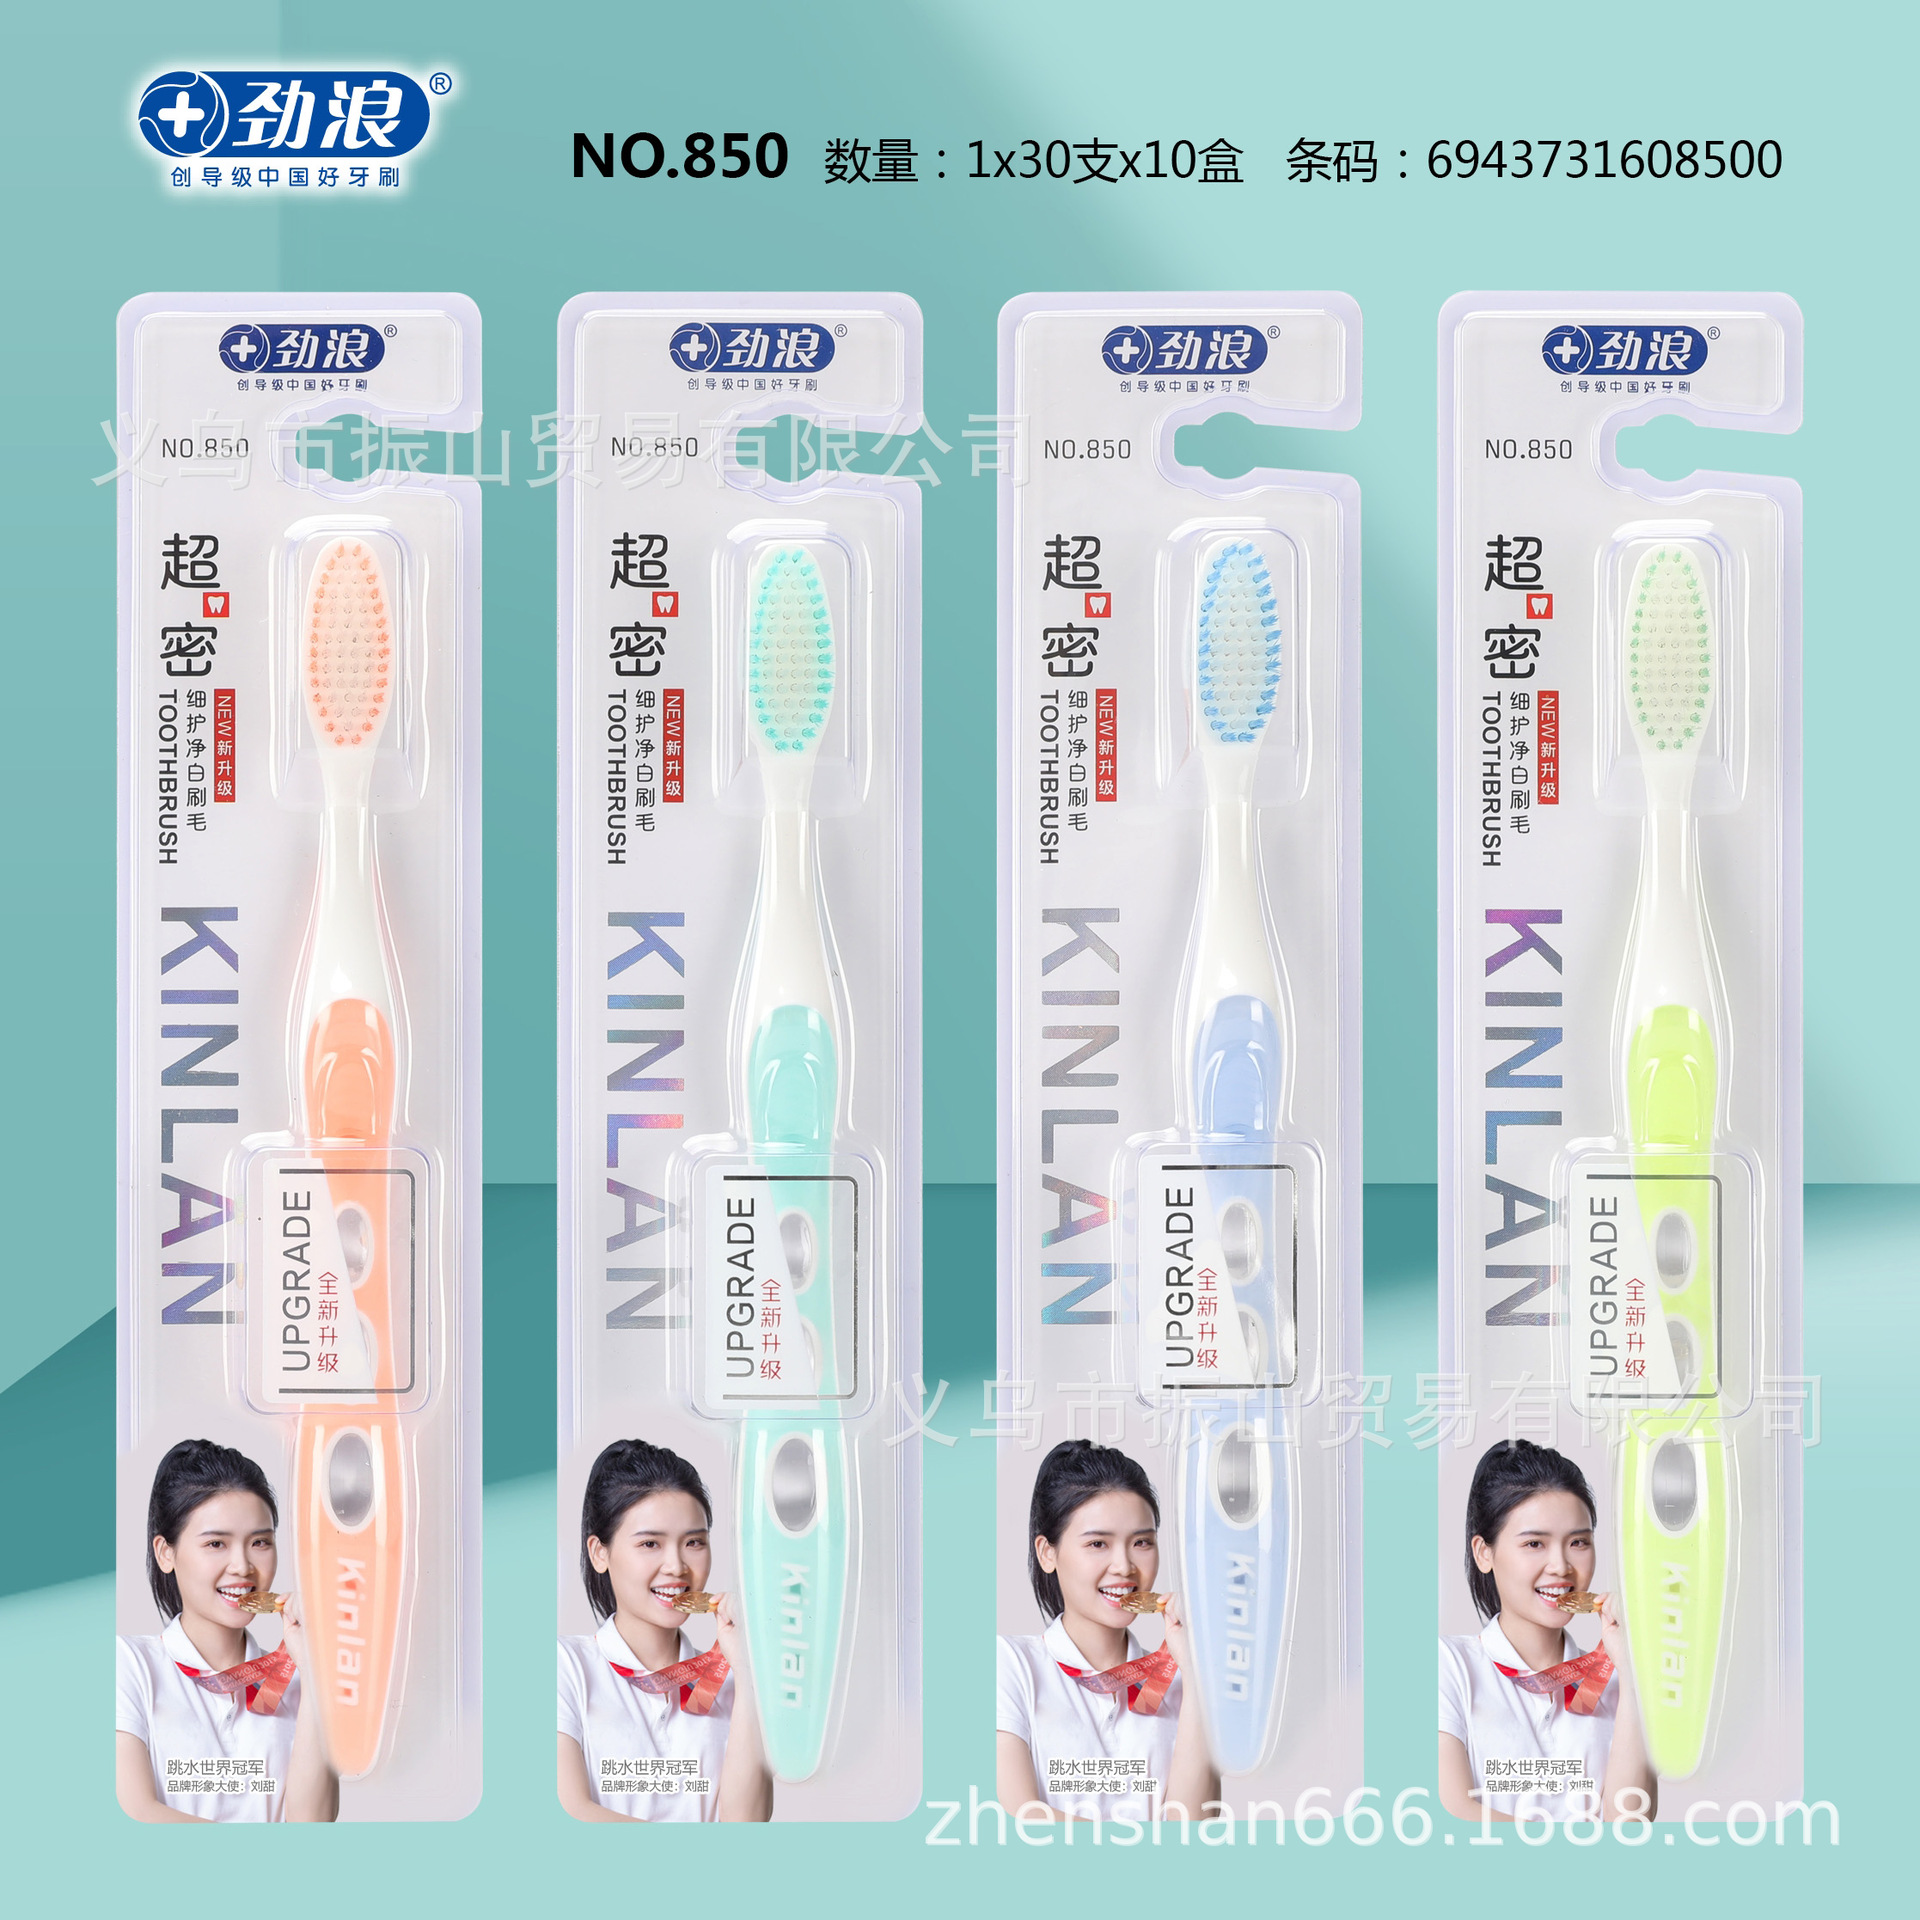 strong waves 850 comfortable and clean teeth ultra-dense and fine protection soft-bristle toothbrush